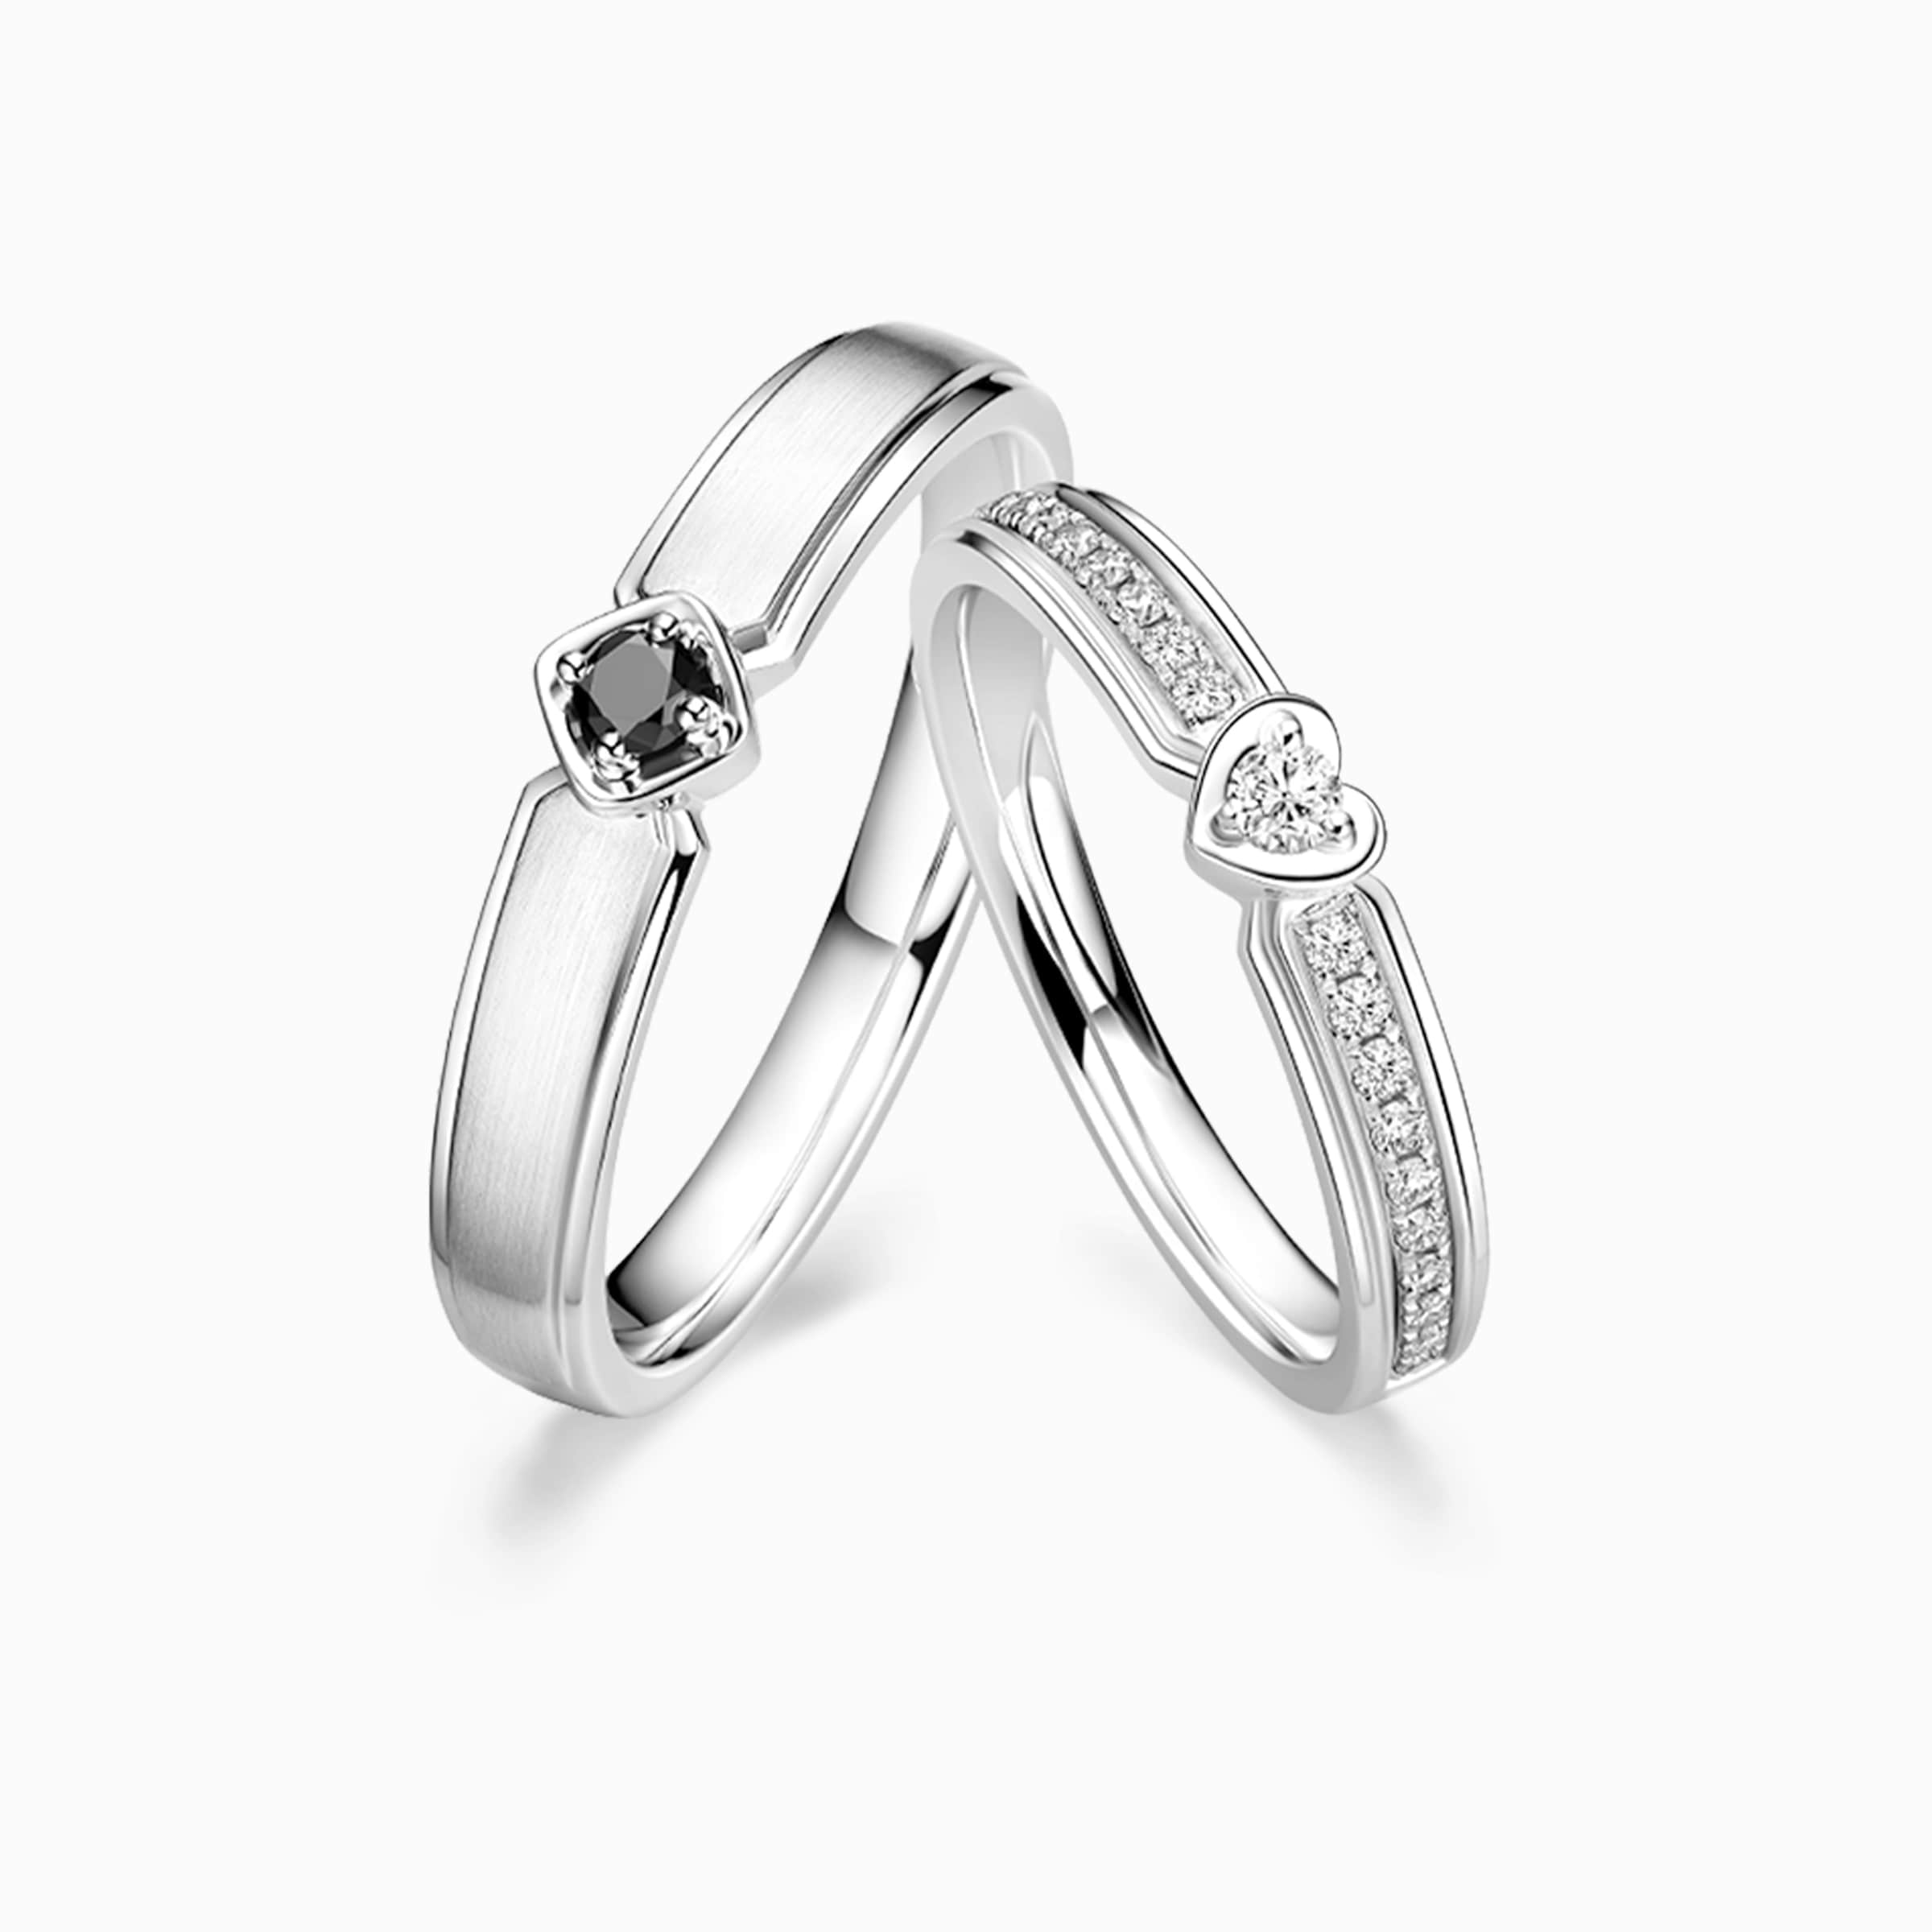 Darry Ring diamond wedding rings set for man and woman in platinum